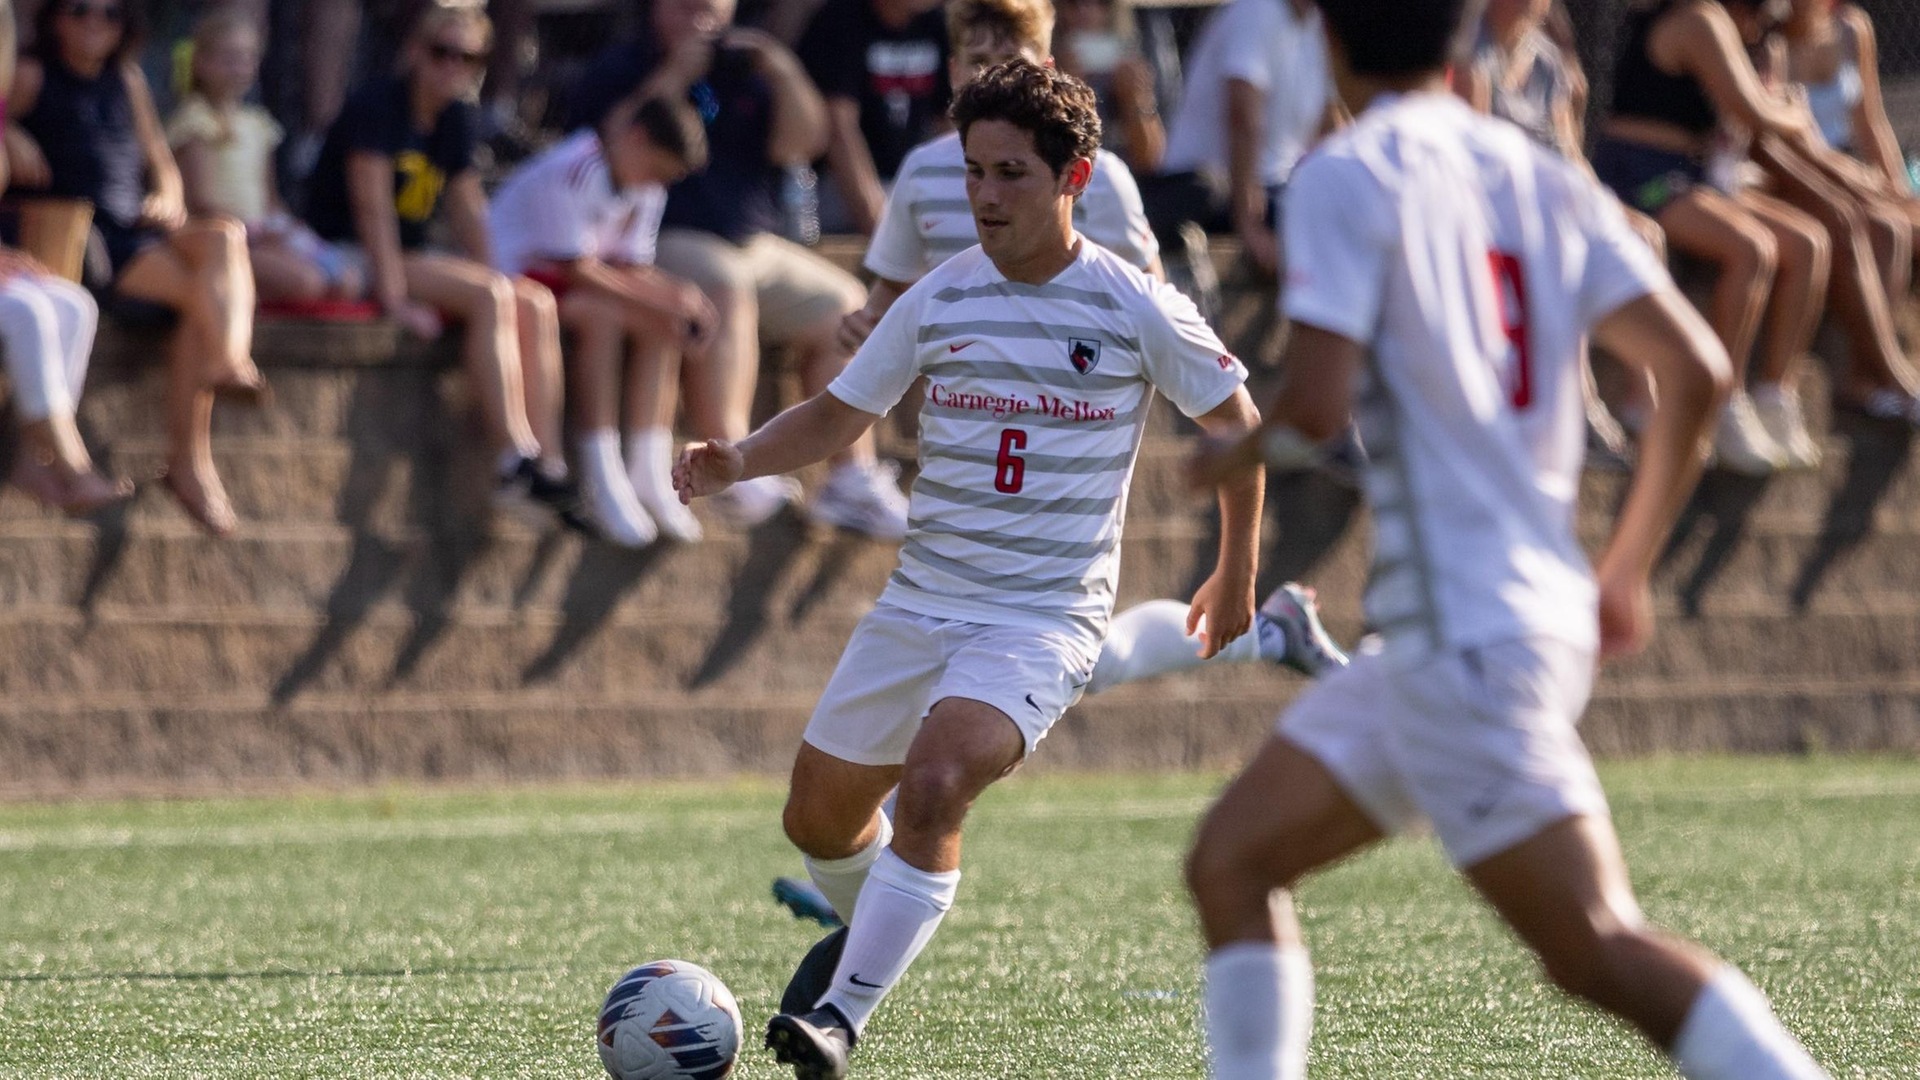 men's soccer player wearing a white uniform pulls leg back to kick the ball near his left foot